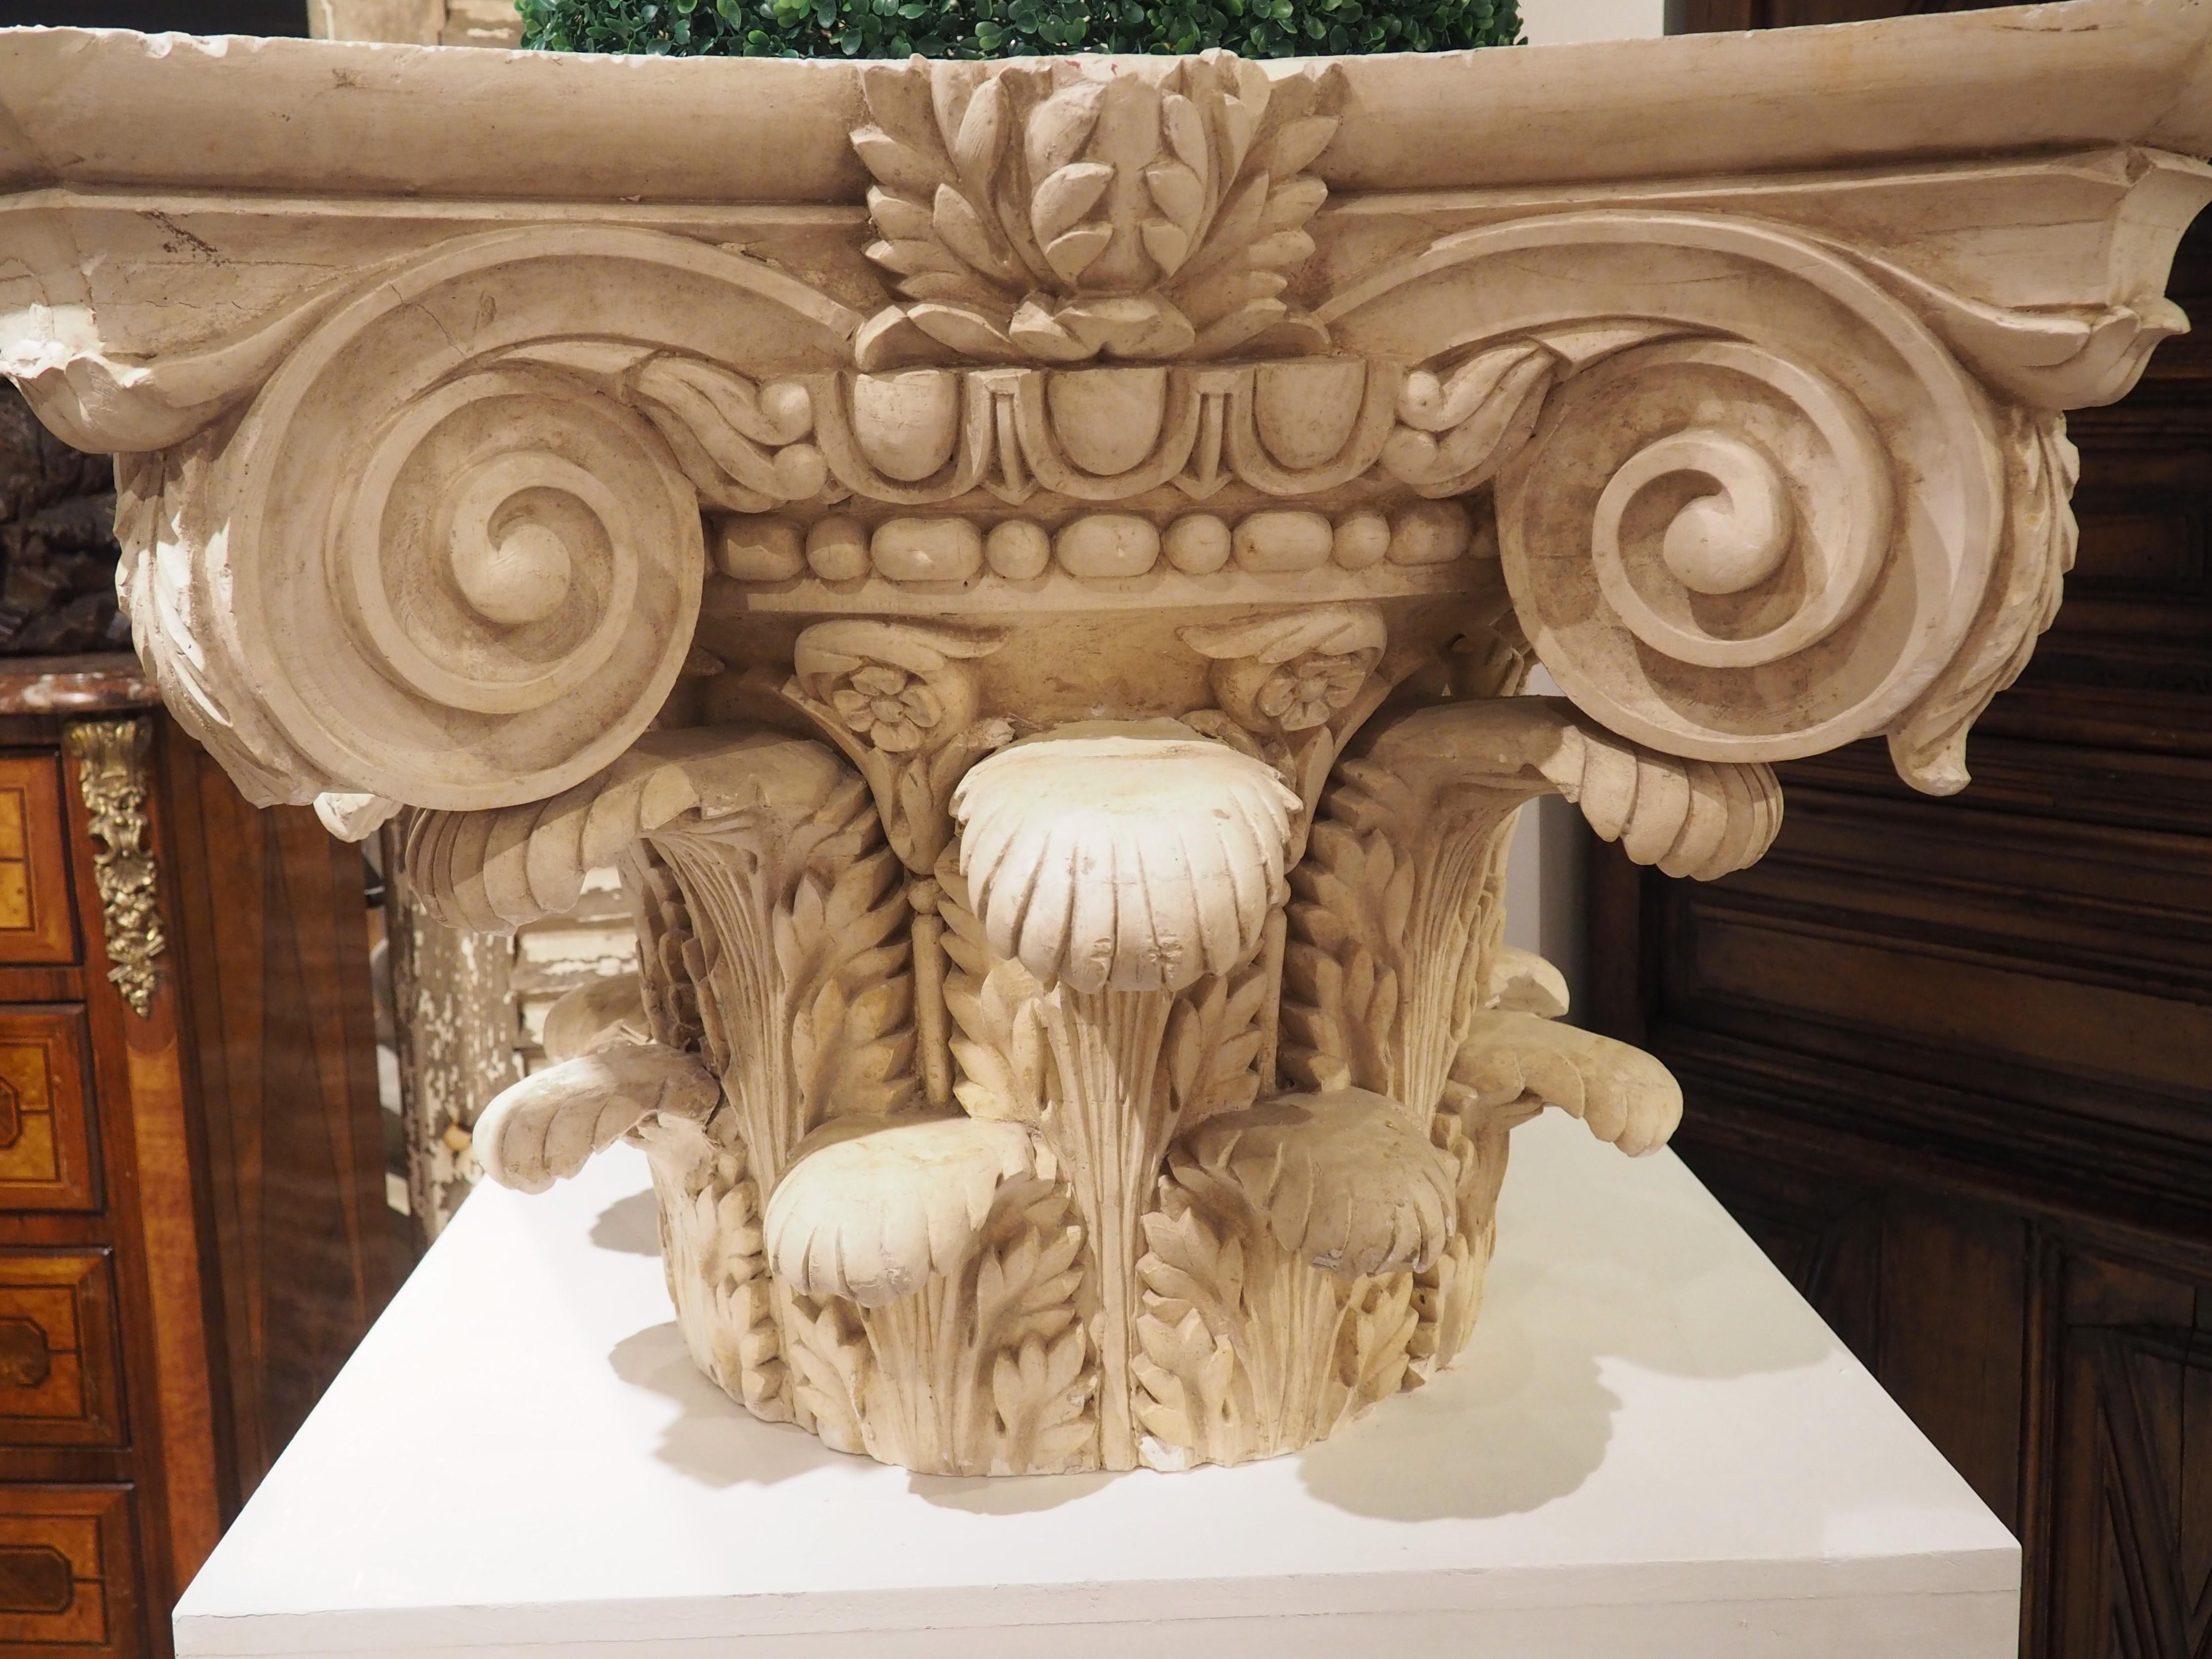 Hand-Painted Large Plaster Composite Order Capital on Wooden Pedestal, France, Early 1900s For Sale